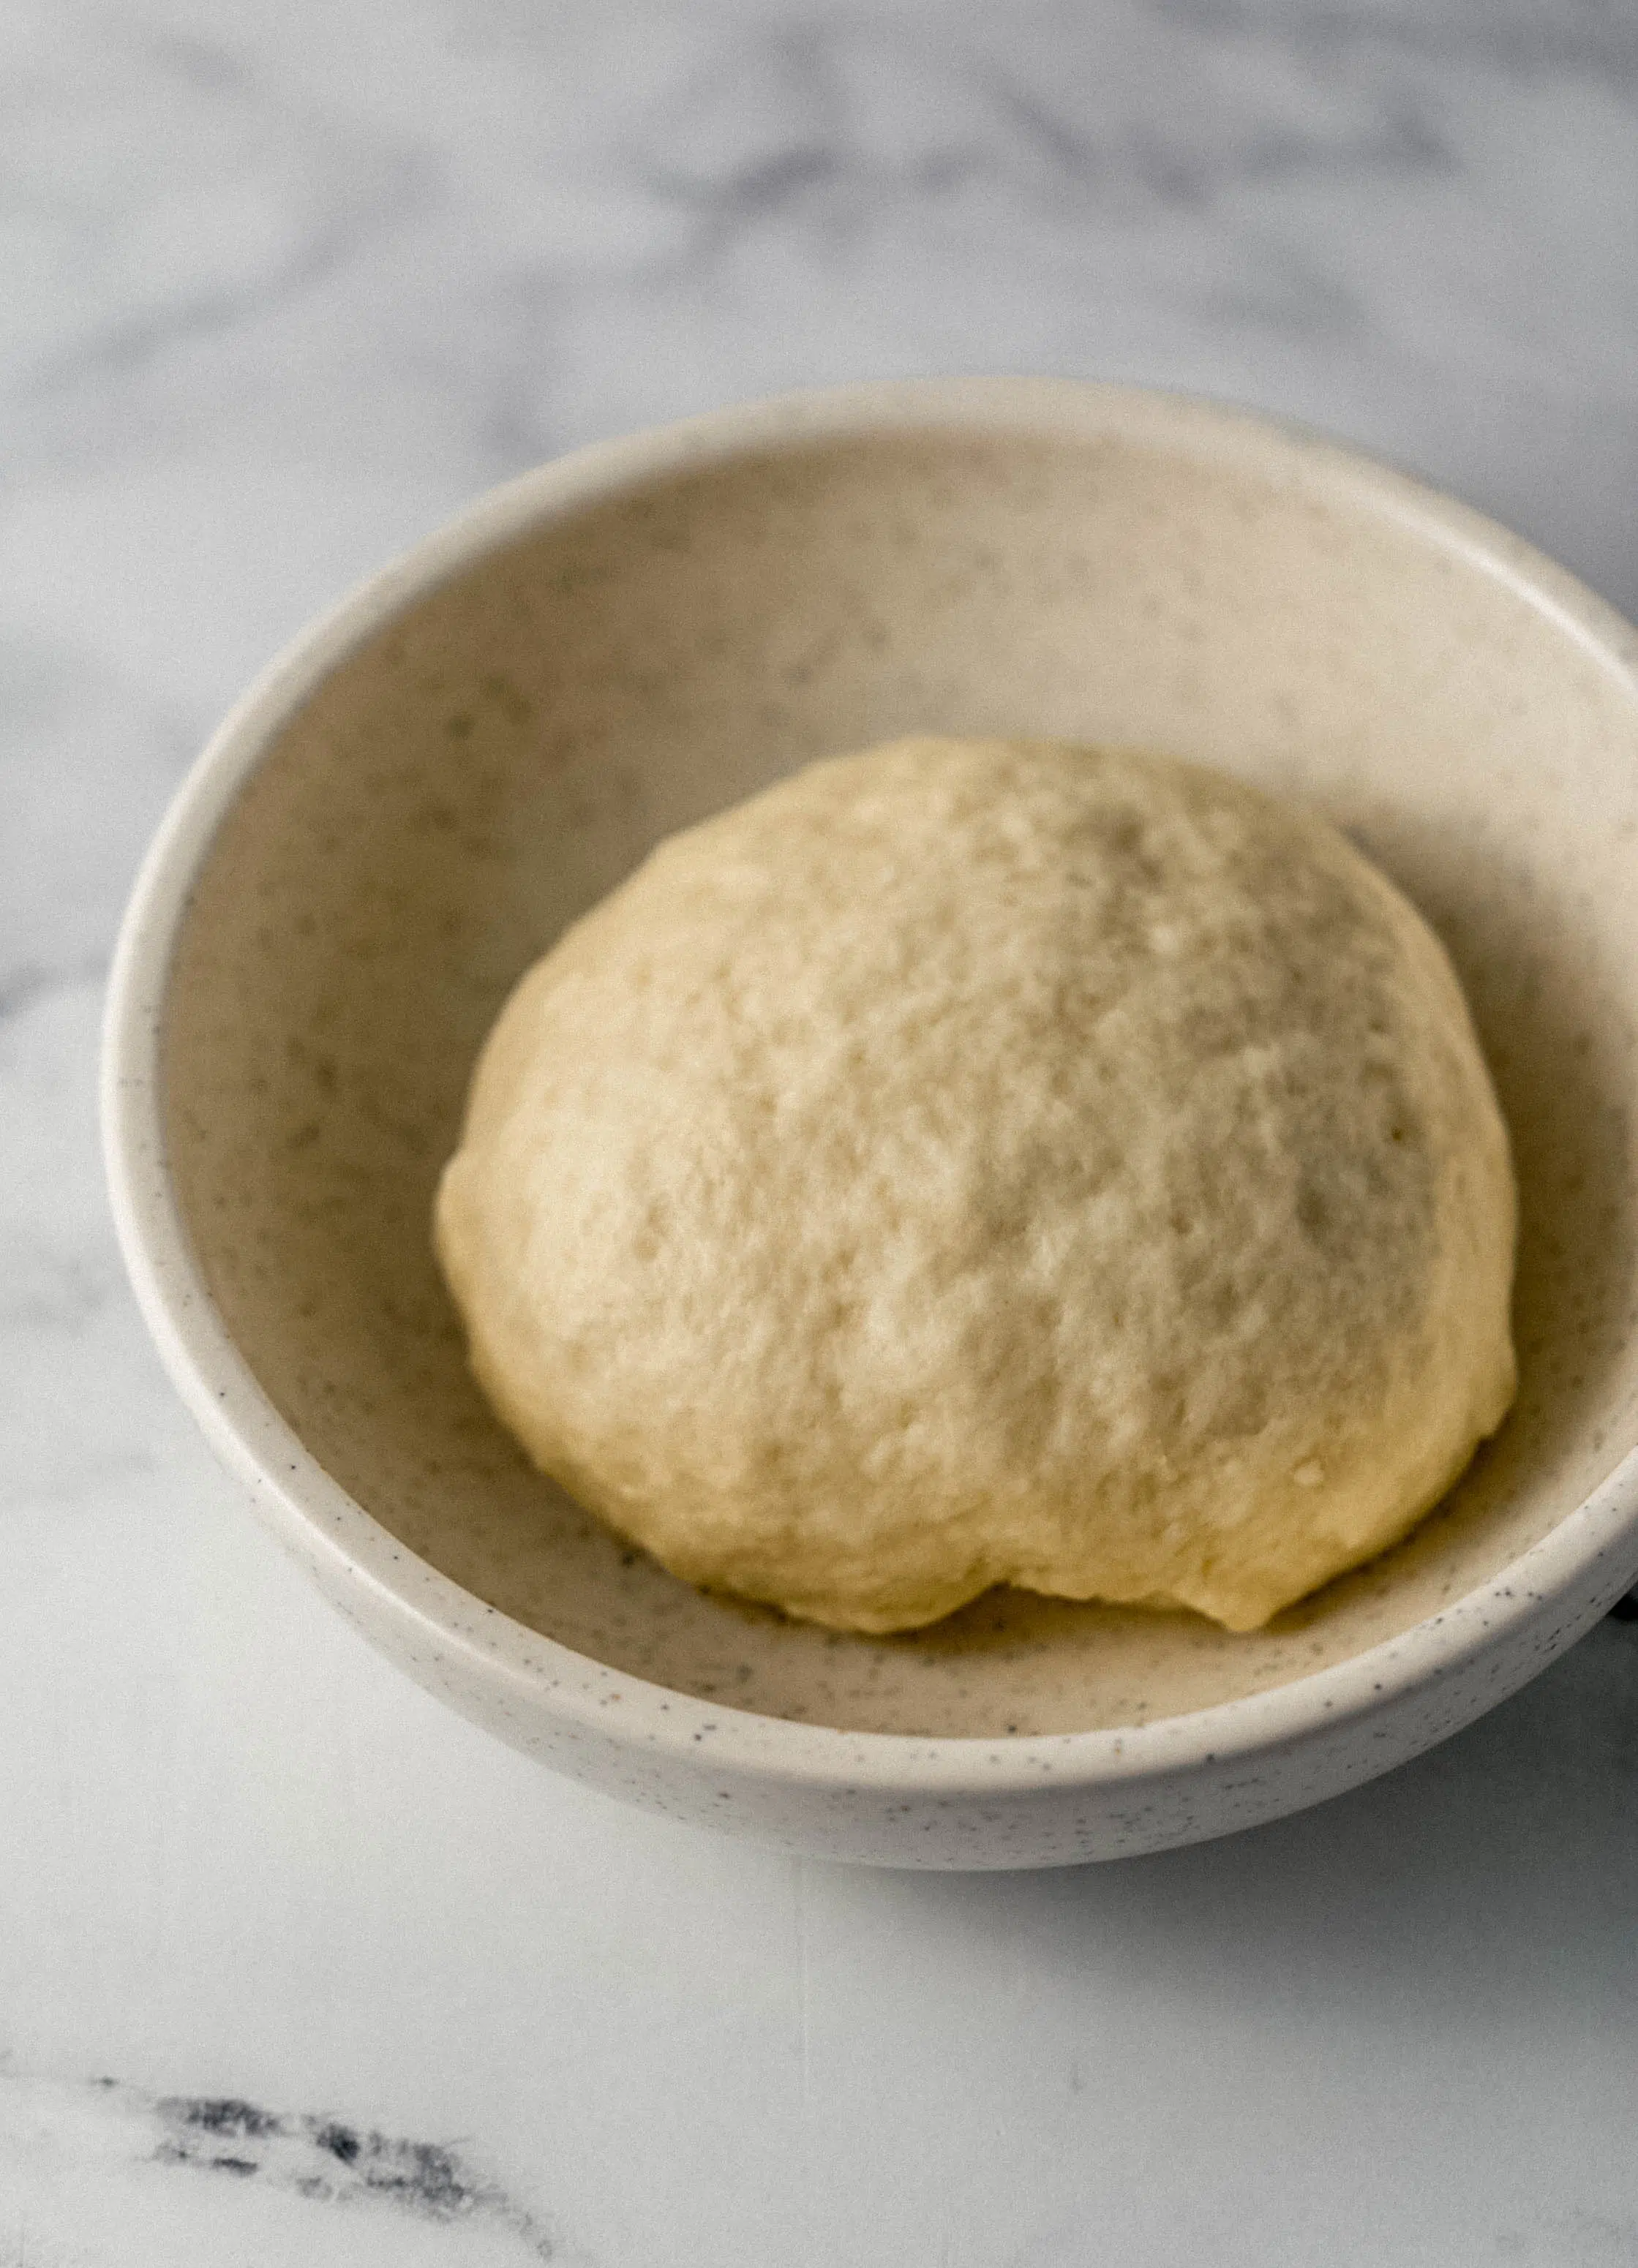 dough ball in mixing bowl after having time to rise and double in size